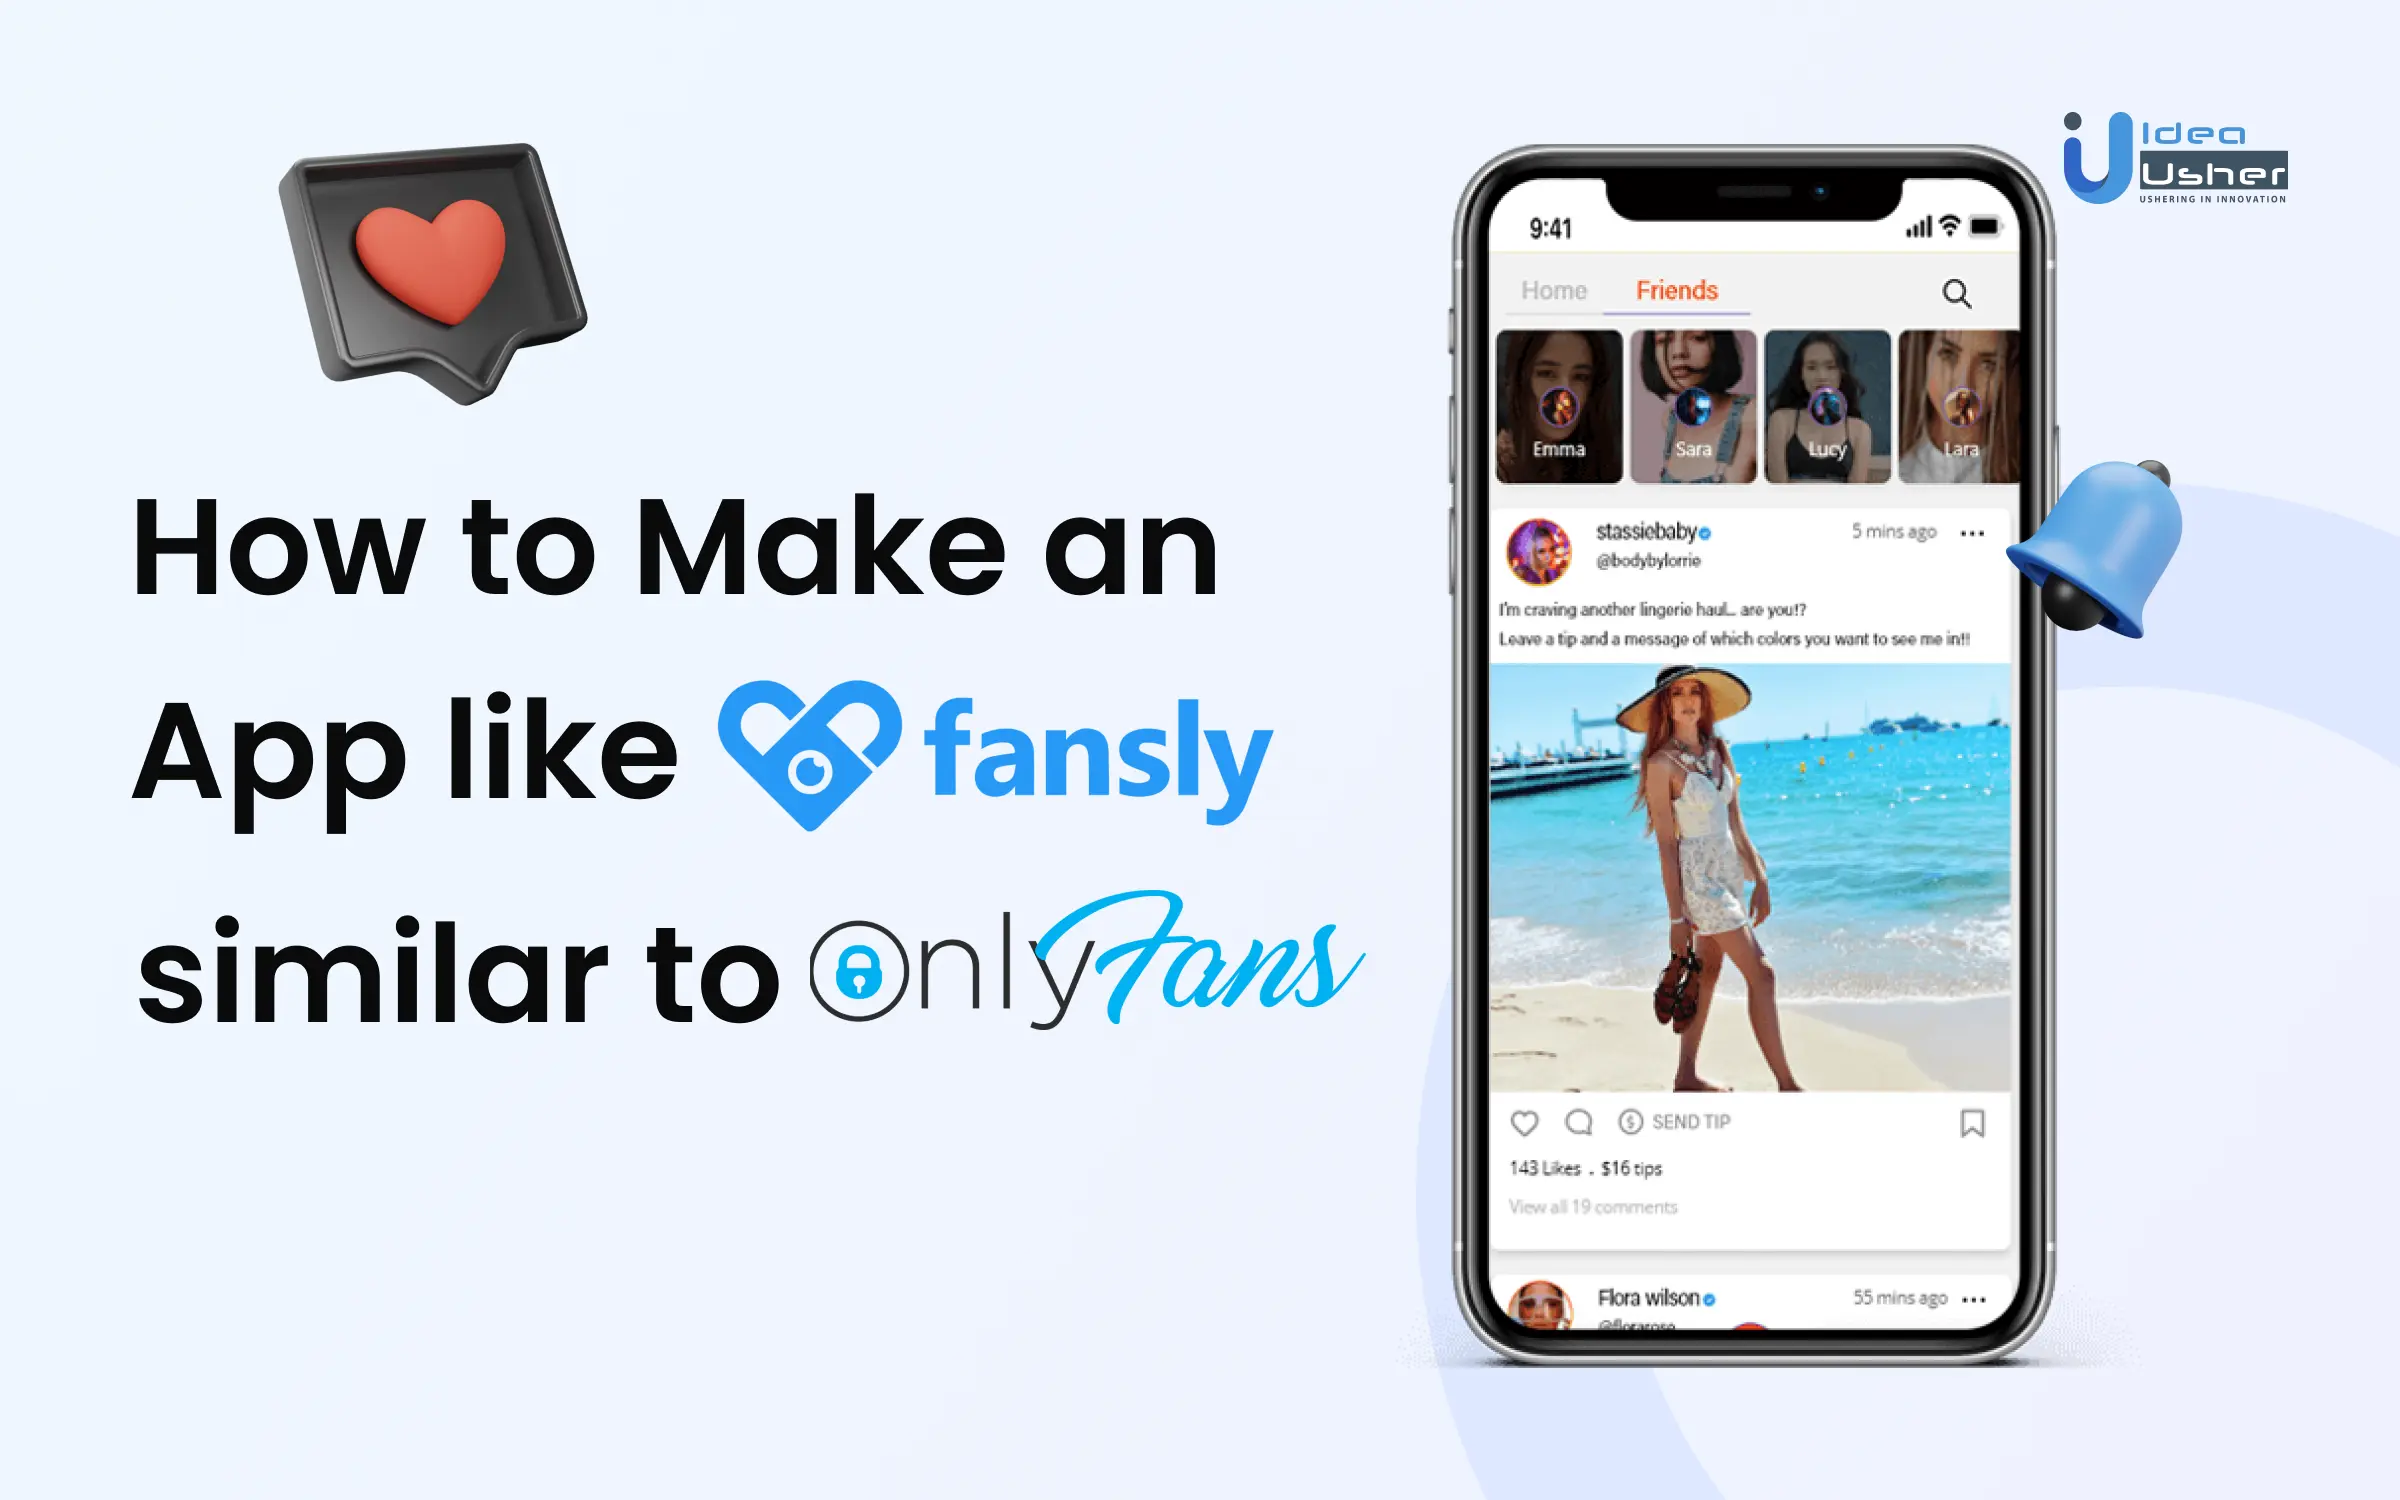 How To Make An App Like Fansly To - Idea